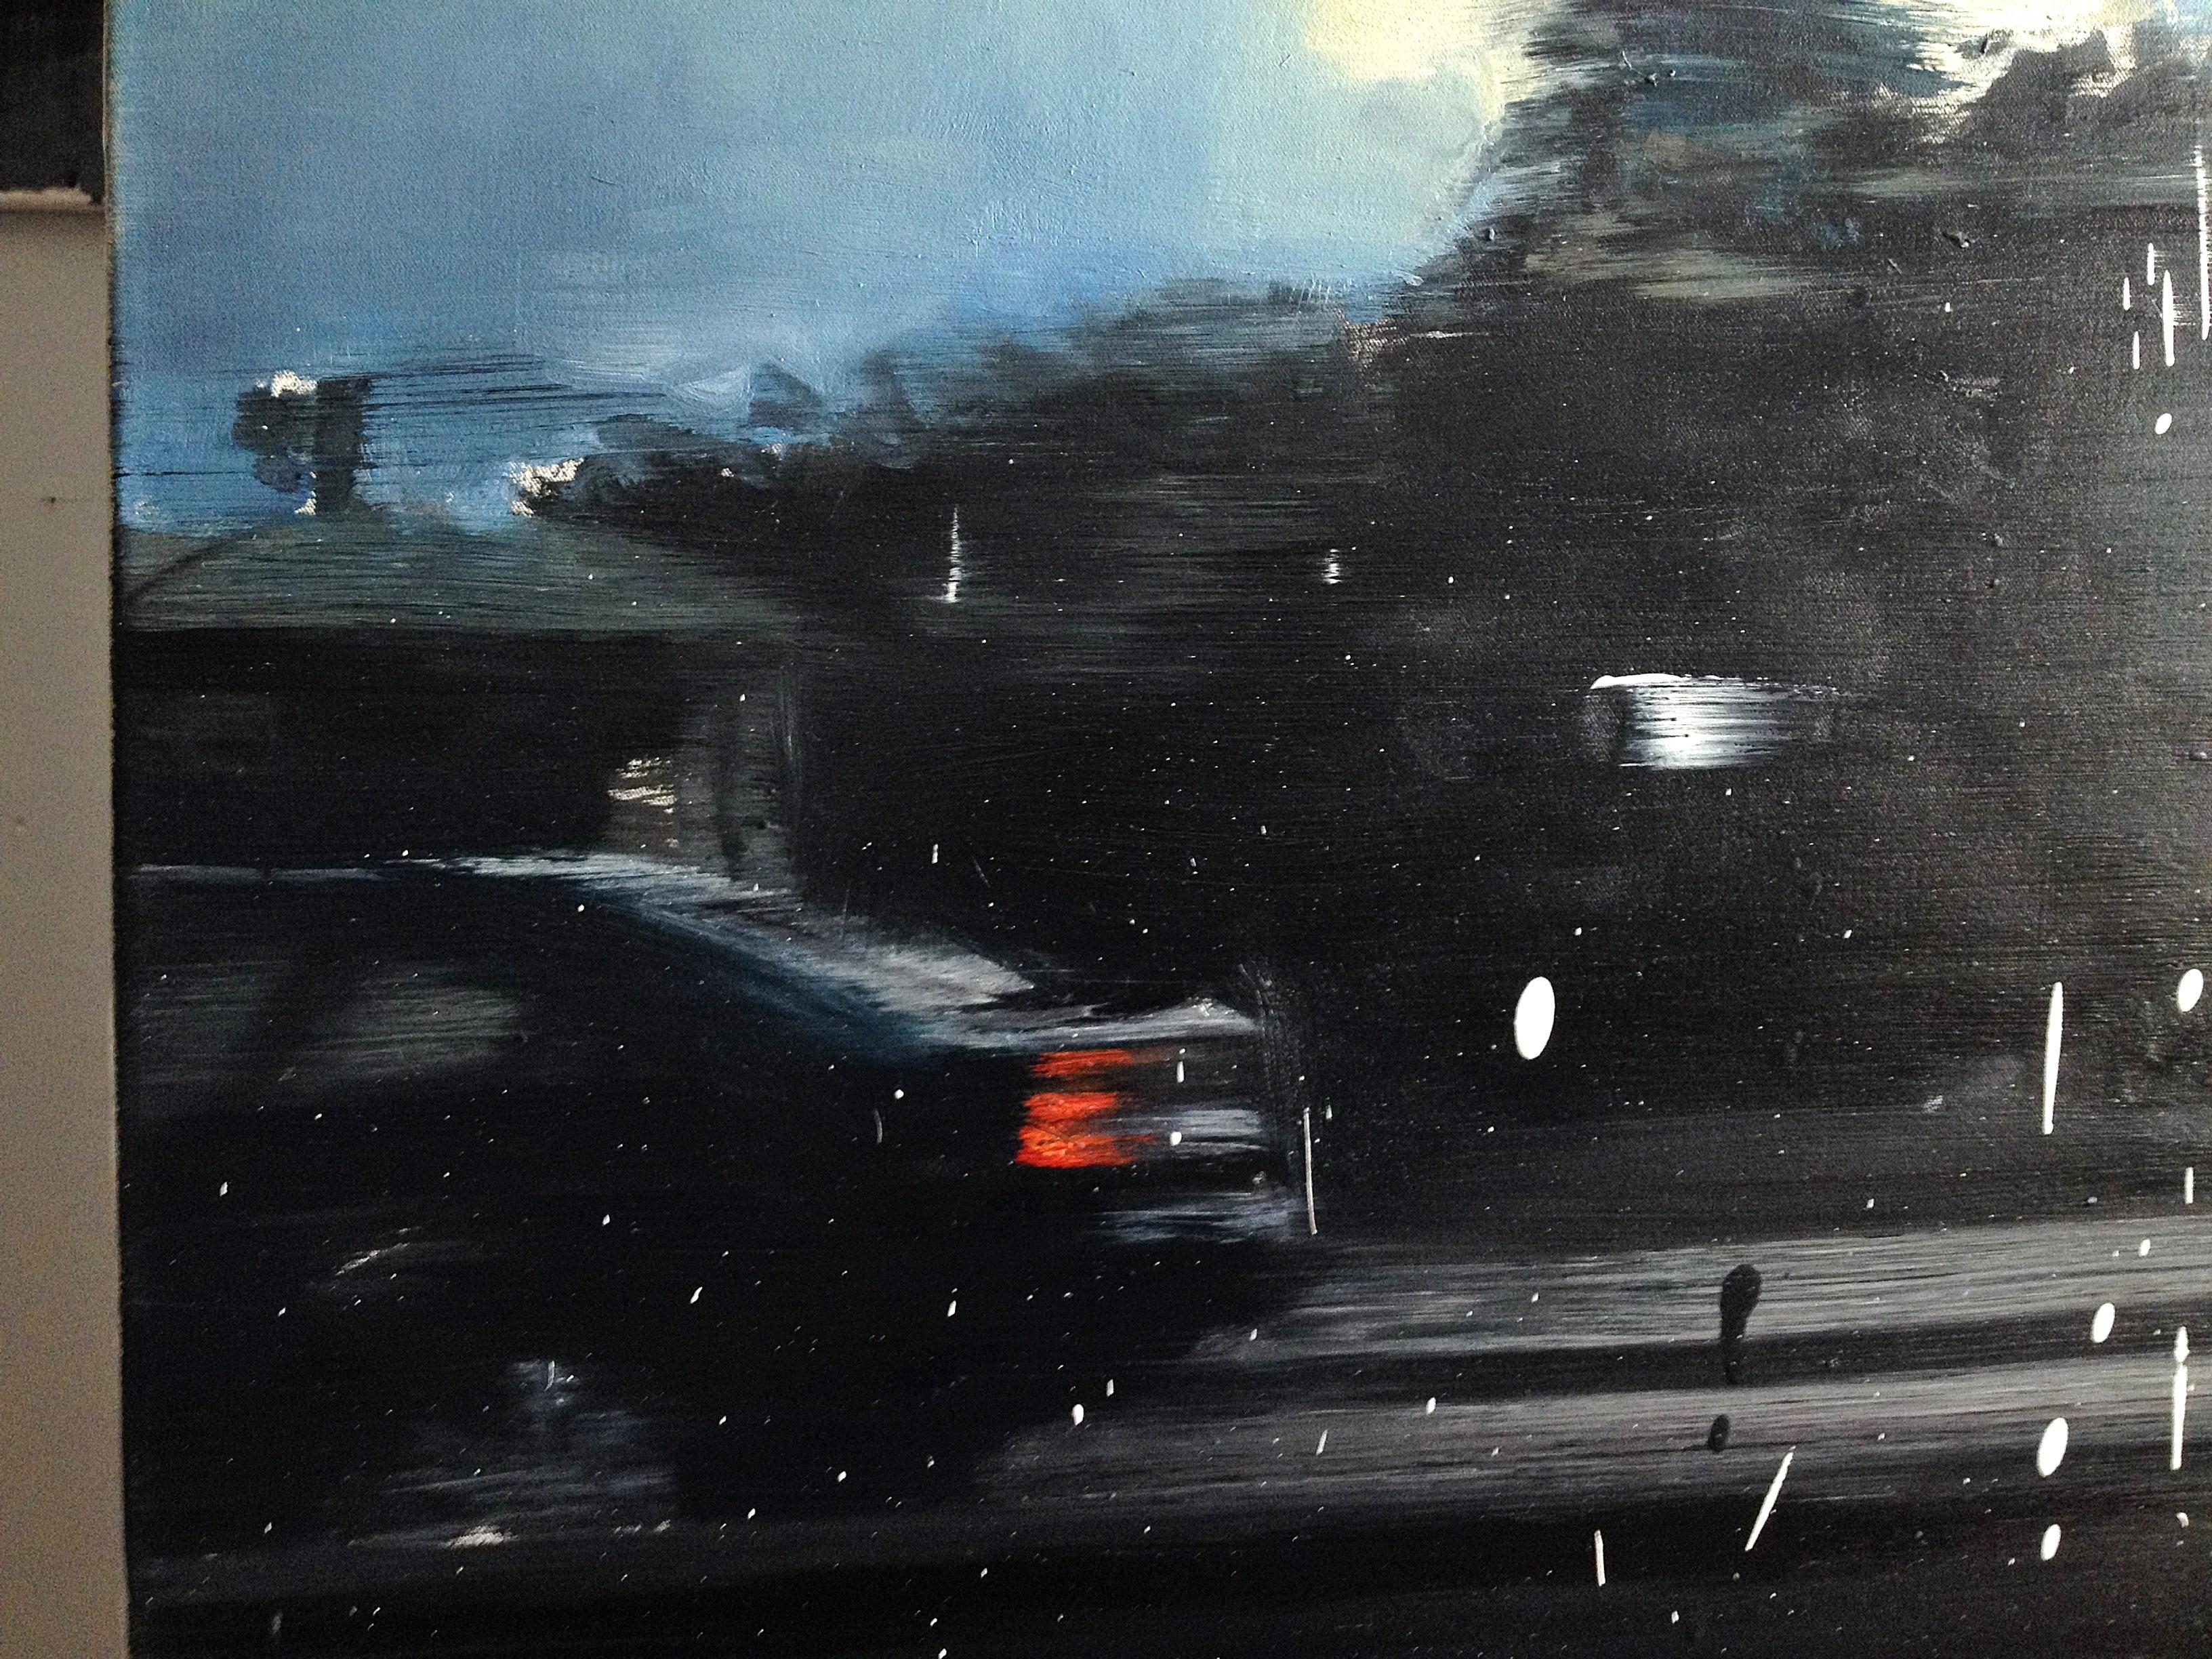 Things Stable, Things Variable .... - Expressive Contemporary Painting, Rain - Black Landscape Painting by Robert Bubel